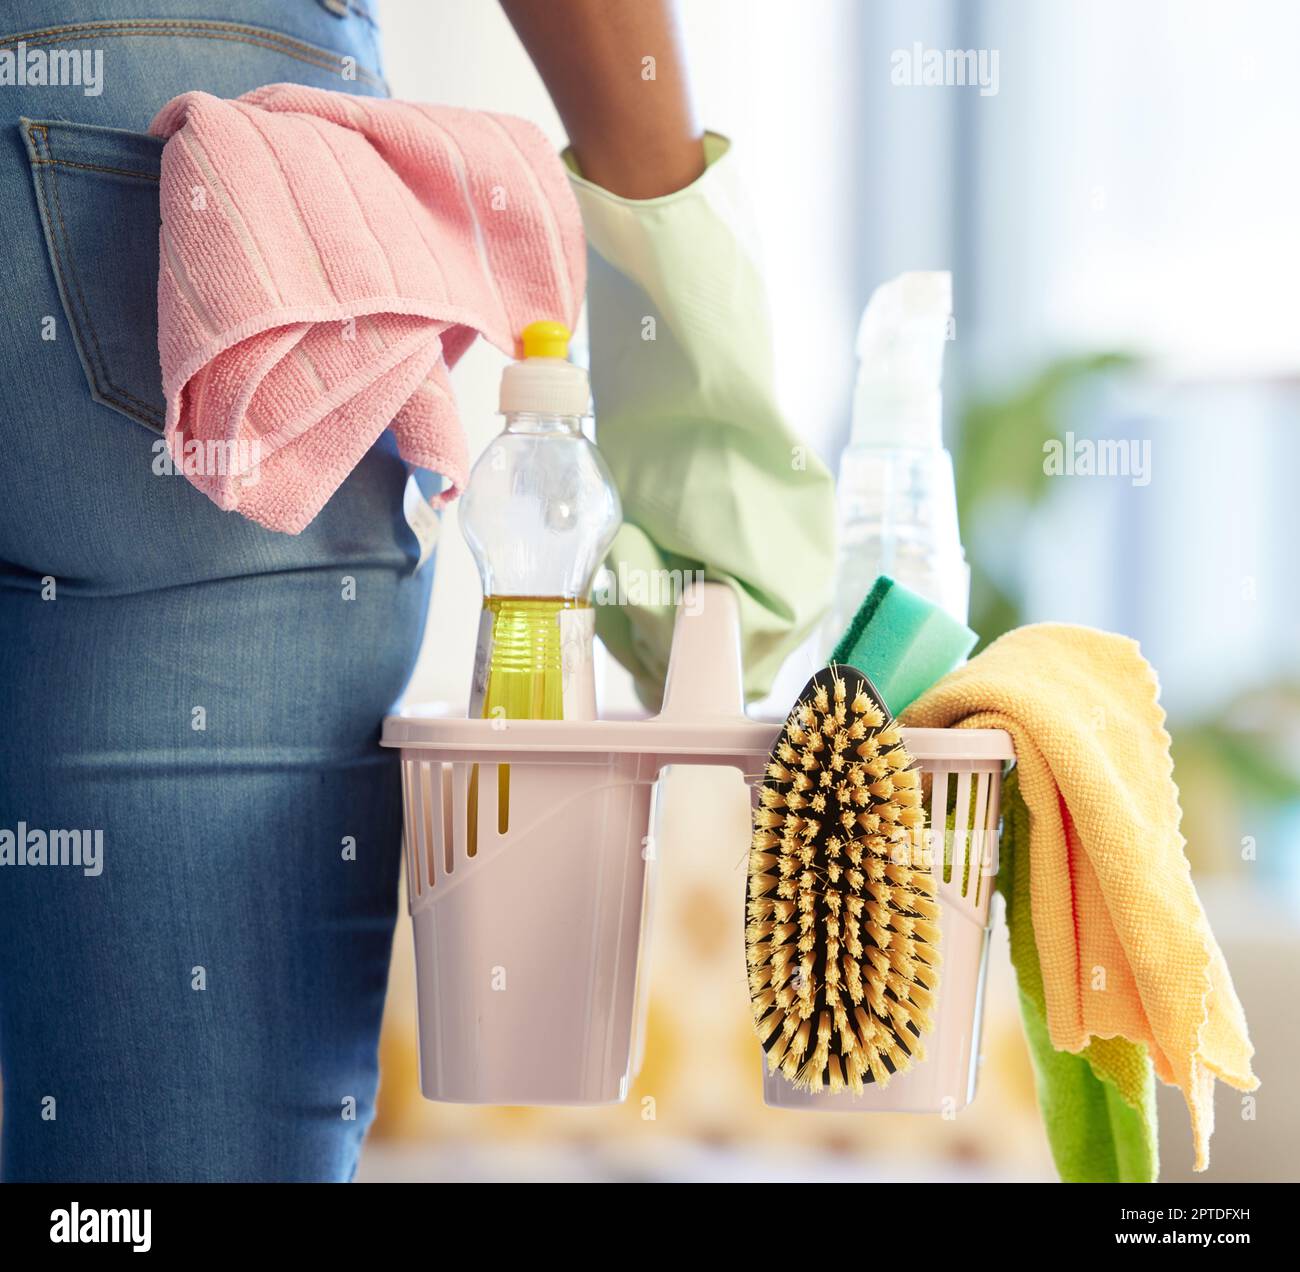 https://c8.alamy.com/comp/2PTDFXH/hand-cleaning-products-and-home-supplies-for-house-cleaning-service-cleaner-chemical-basket-and-hygiene-safety-tools-for-spring-clean-worker-in-lat-2PTDFXH.jpg